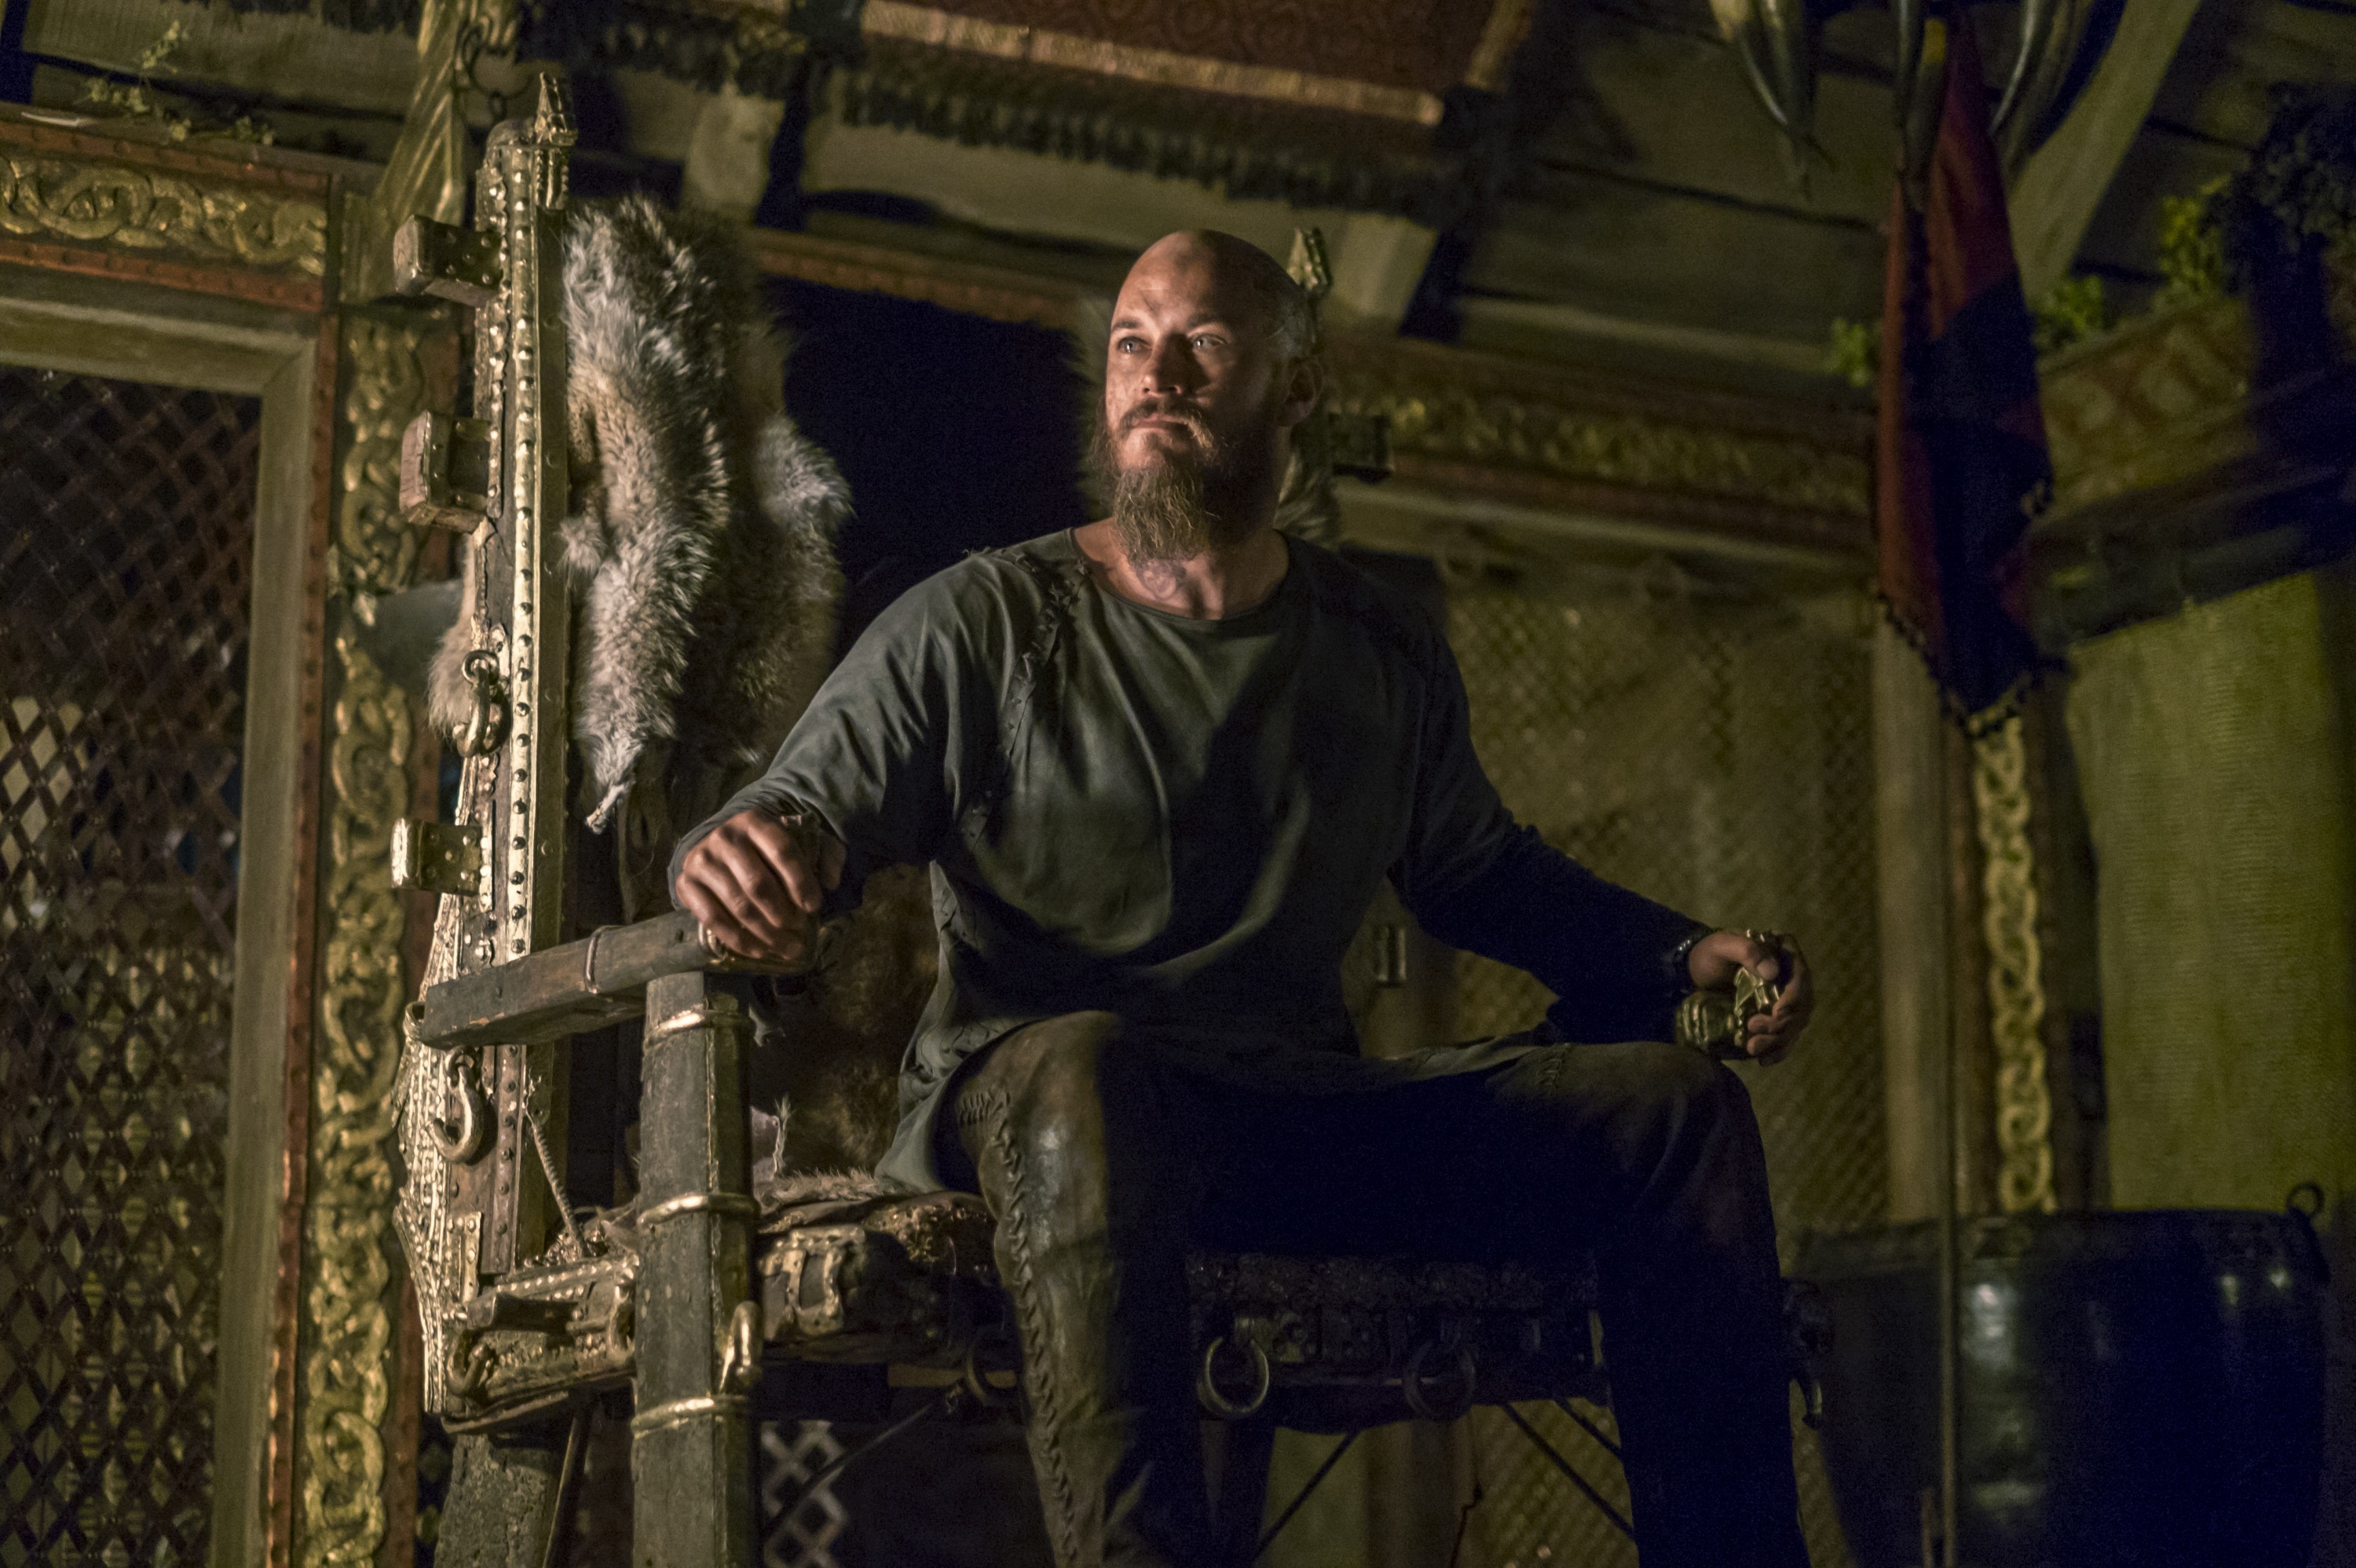 <p>Norse mythology comes to life on the History channel's 2013 drama "Vikings," which starred Travis Fimmel as Ragnar Lothbrok -- one of the greatest Viking warriors of the ninth century. A 20-episode sixth (and final) season debuted in 2019.</p>